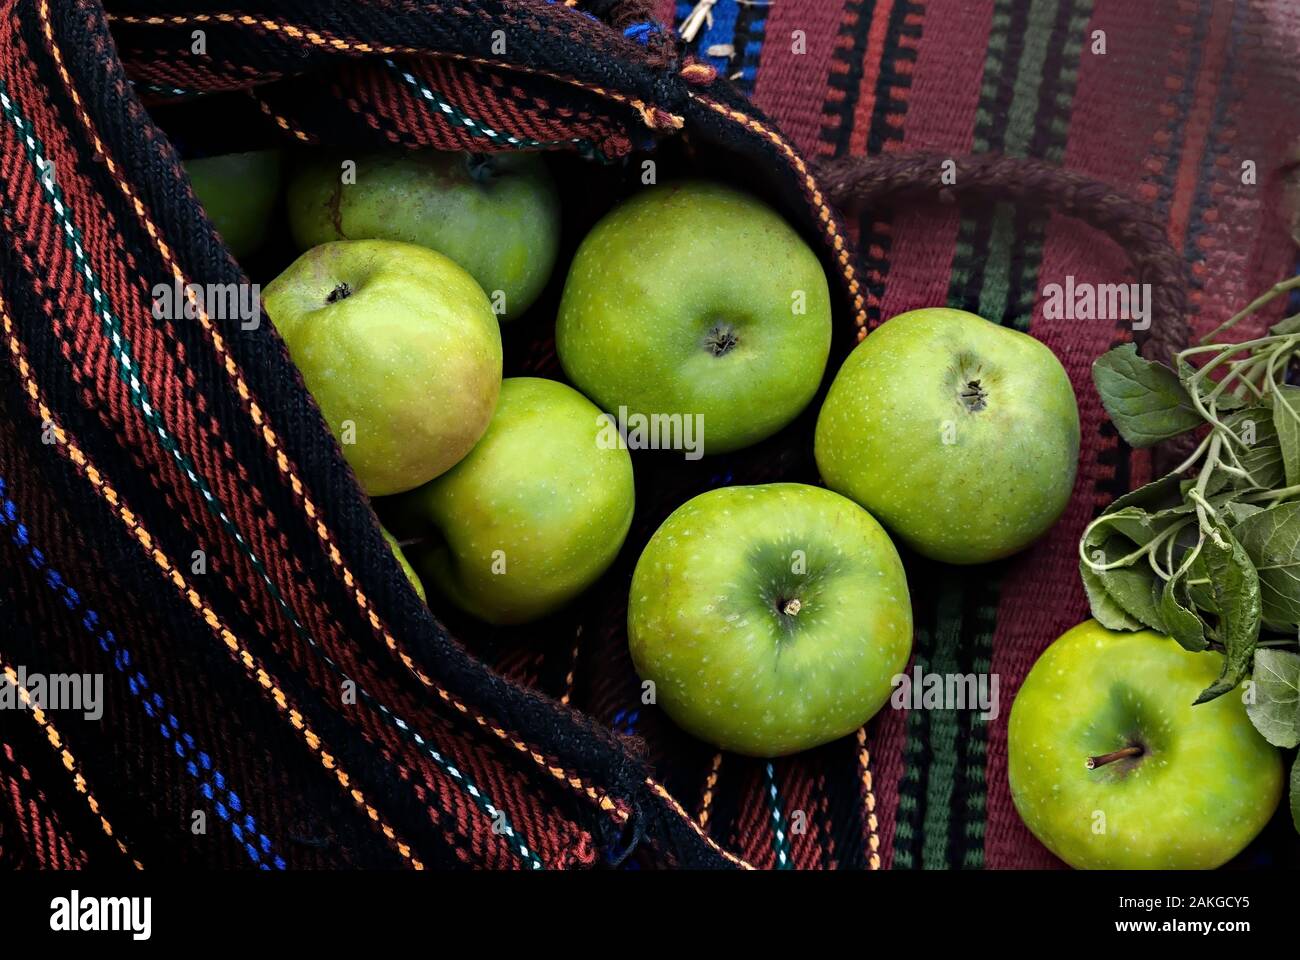 Green apples in a hand-woven bag; Stock Photo